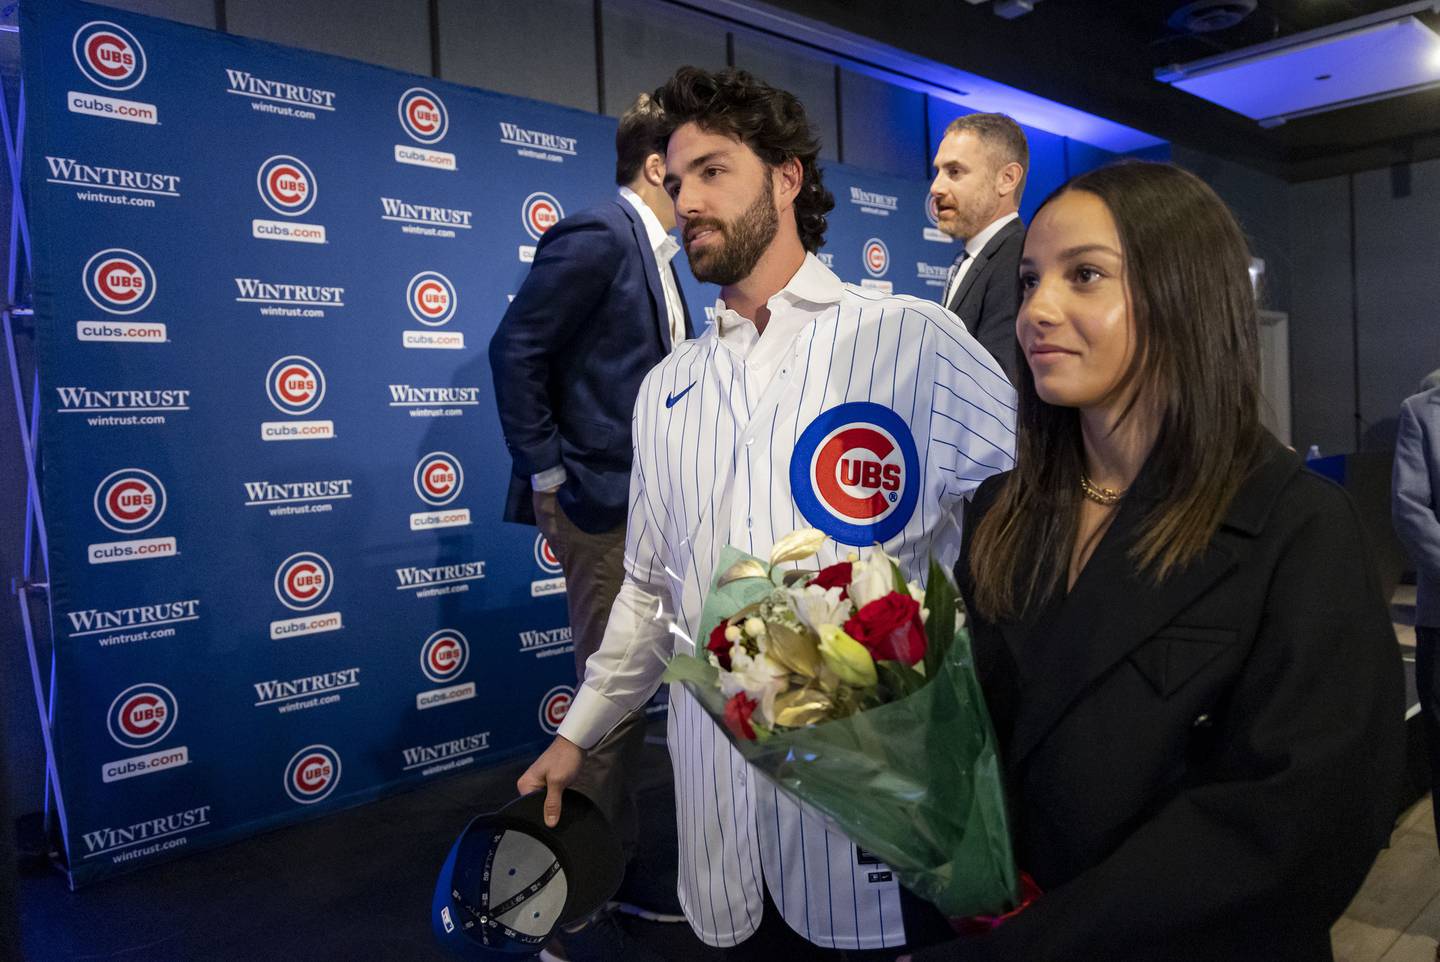 New Cubs shortstop Dansby Swanson departs with his wife, Chicago Red Stars player Mallory Pugh, after a news conference Wednesday, Dec. 21, 2022, at Wrigley Field.